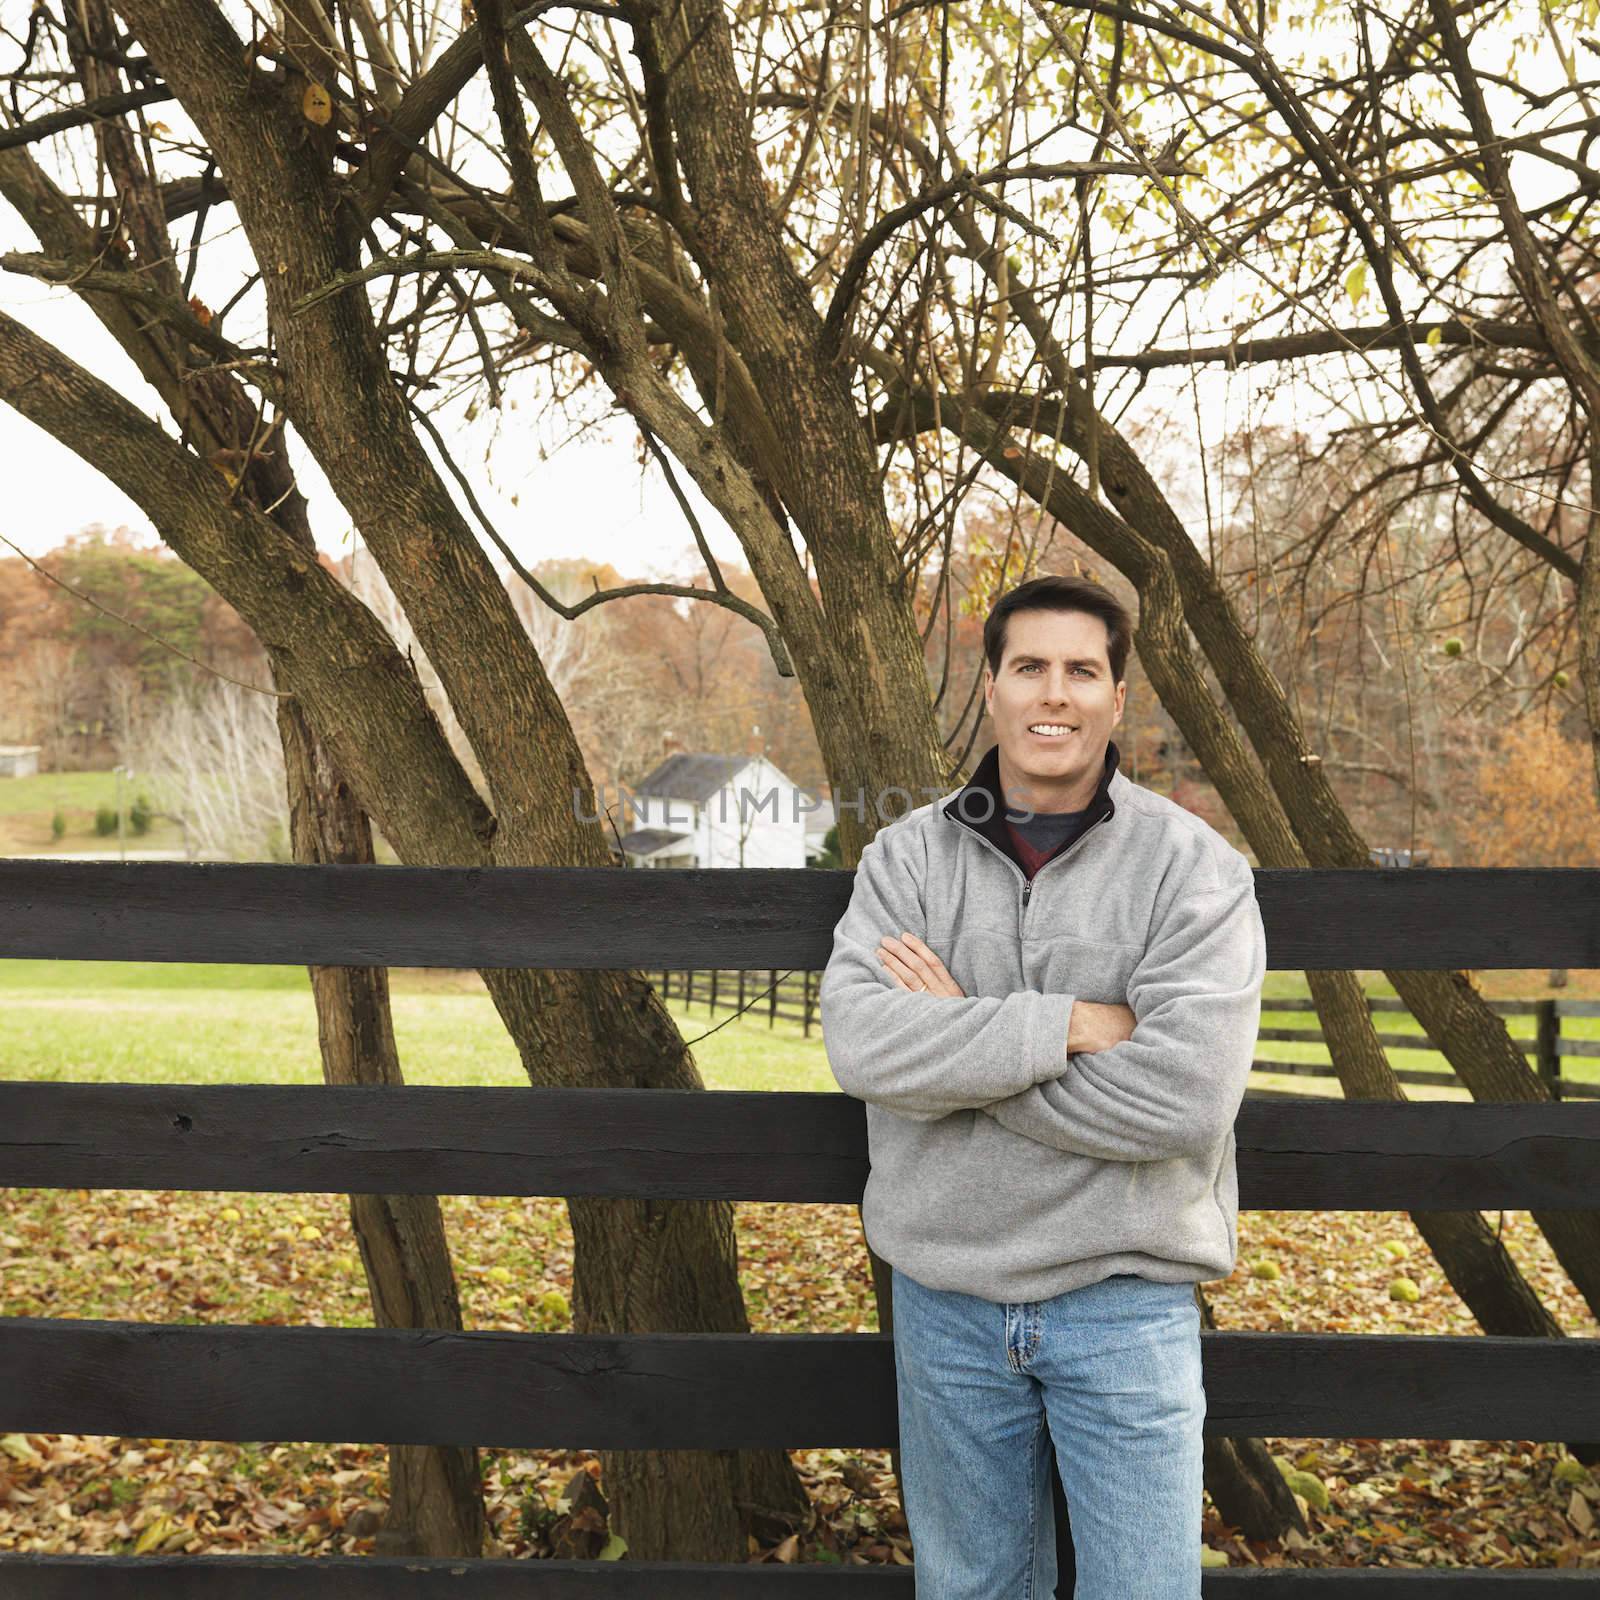 Caucasian man leaning against fence smiling in rural setting.